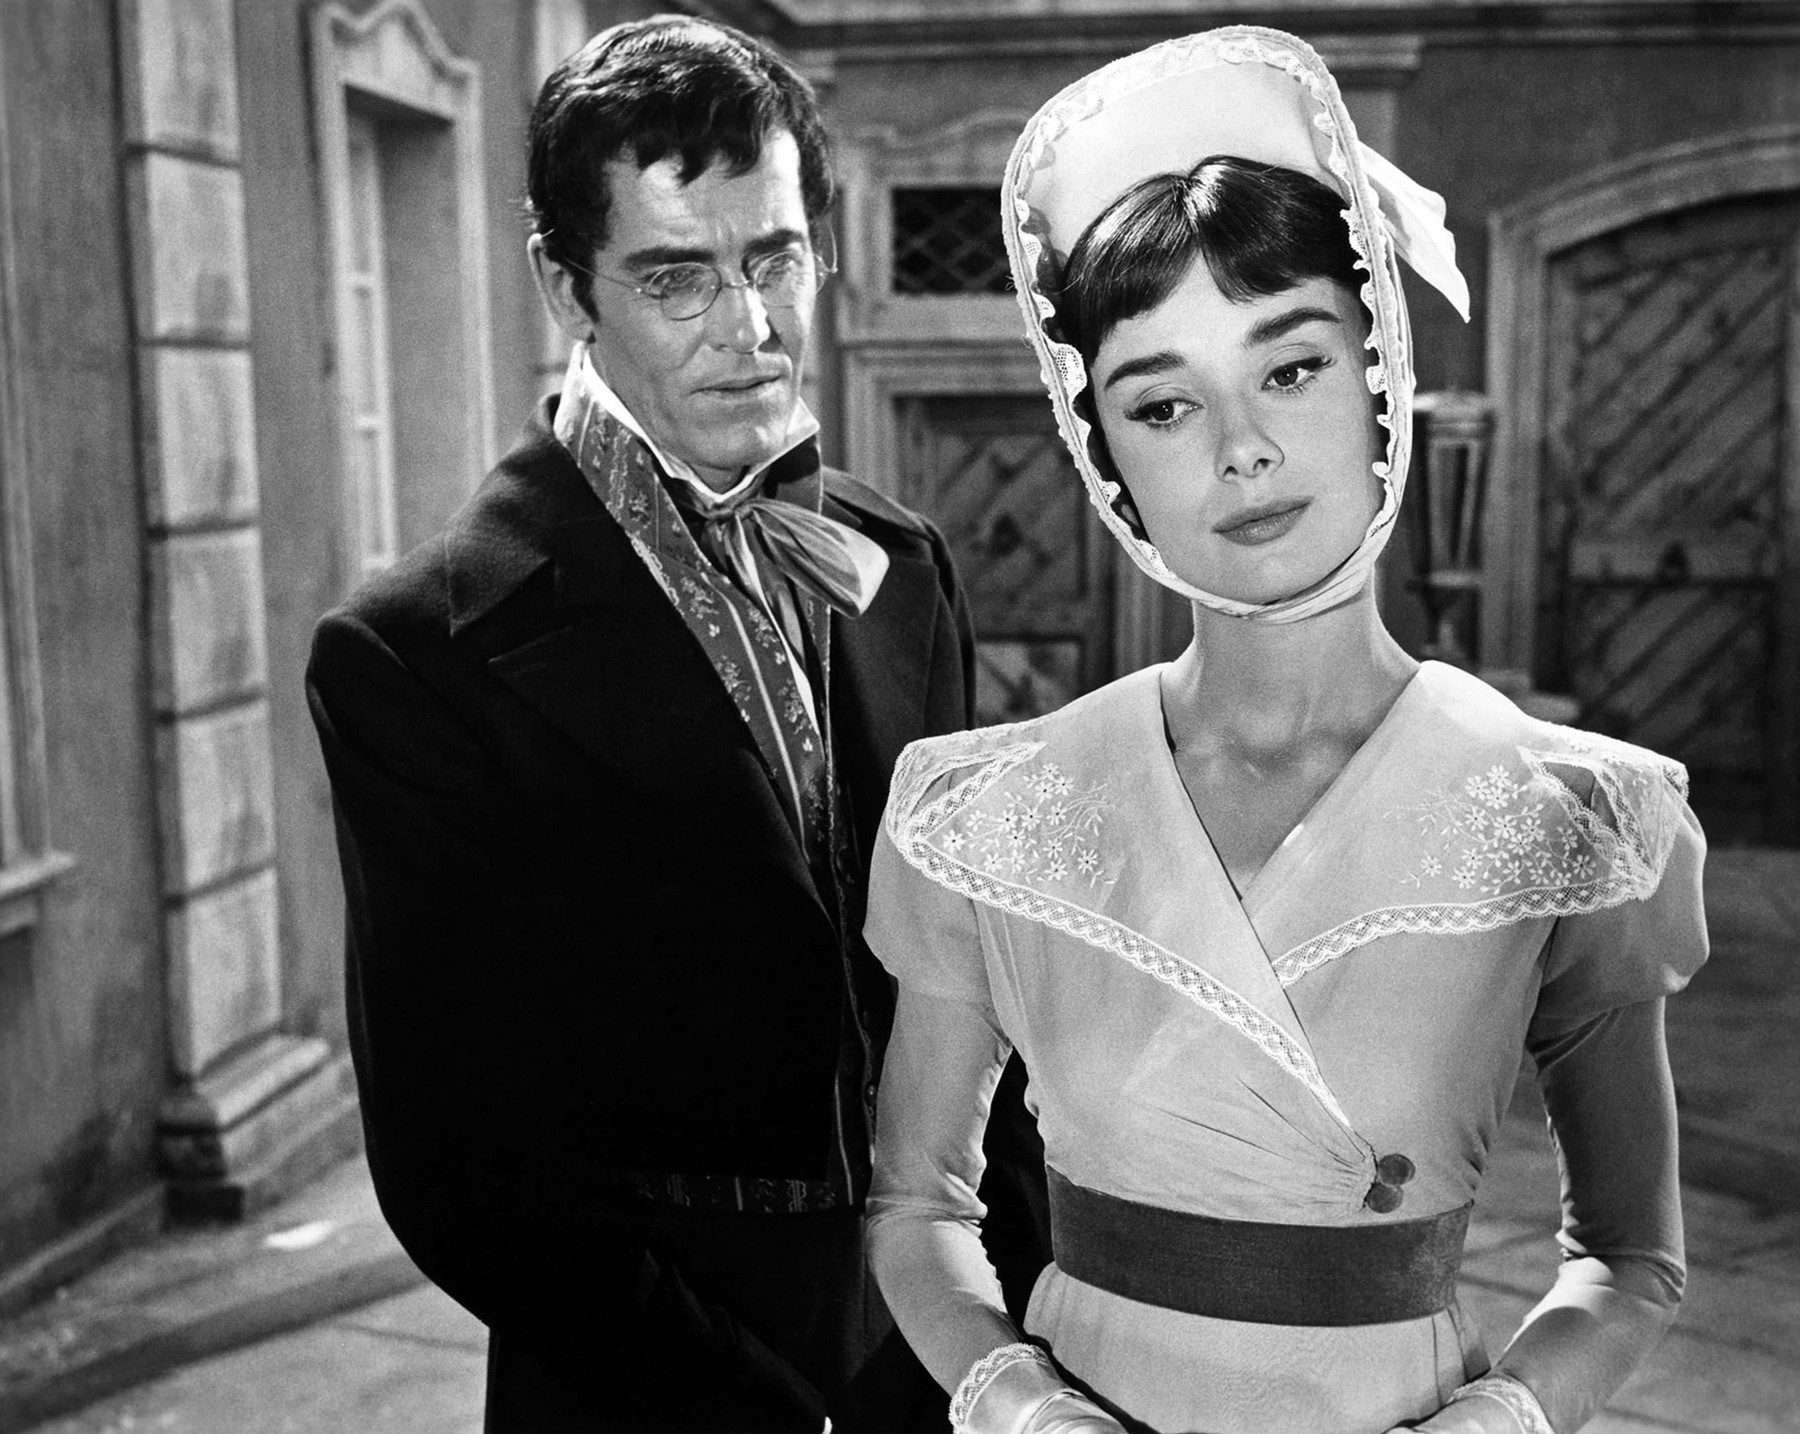 Audrey Hepburn was one of many actresses to portray Natasha Rostova, Tolstoy's ideal woman, on the screen.